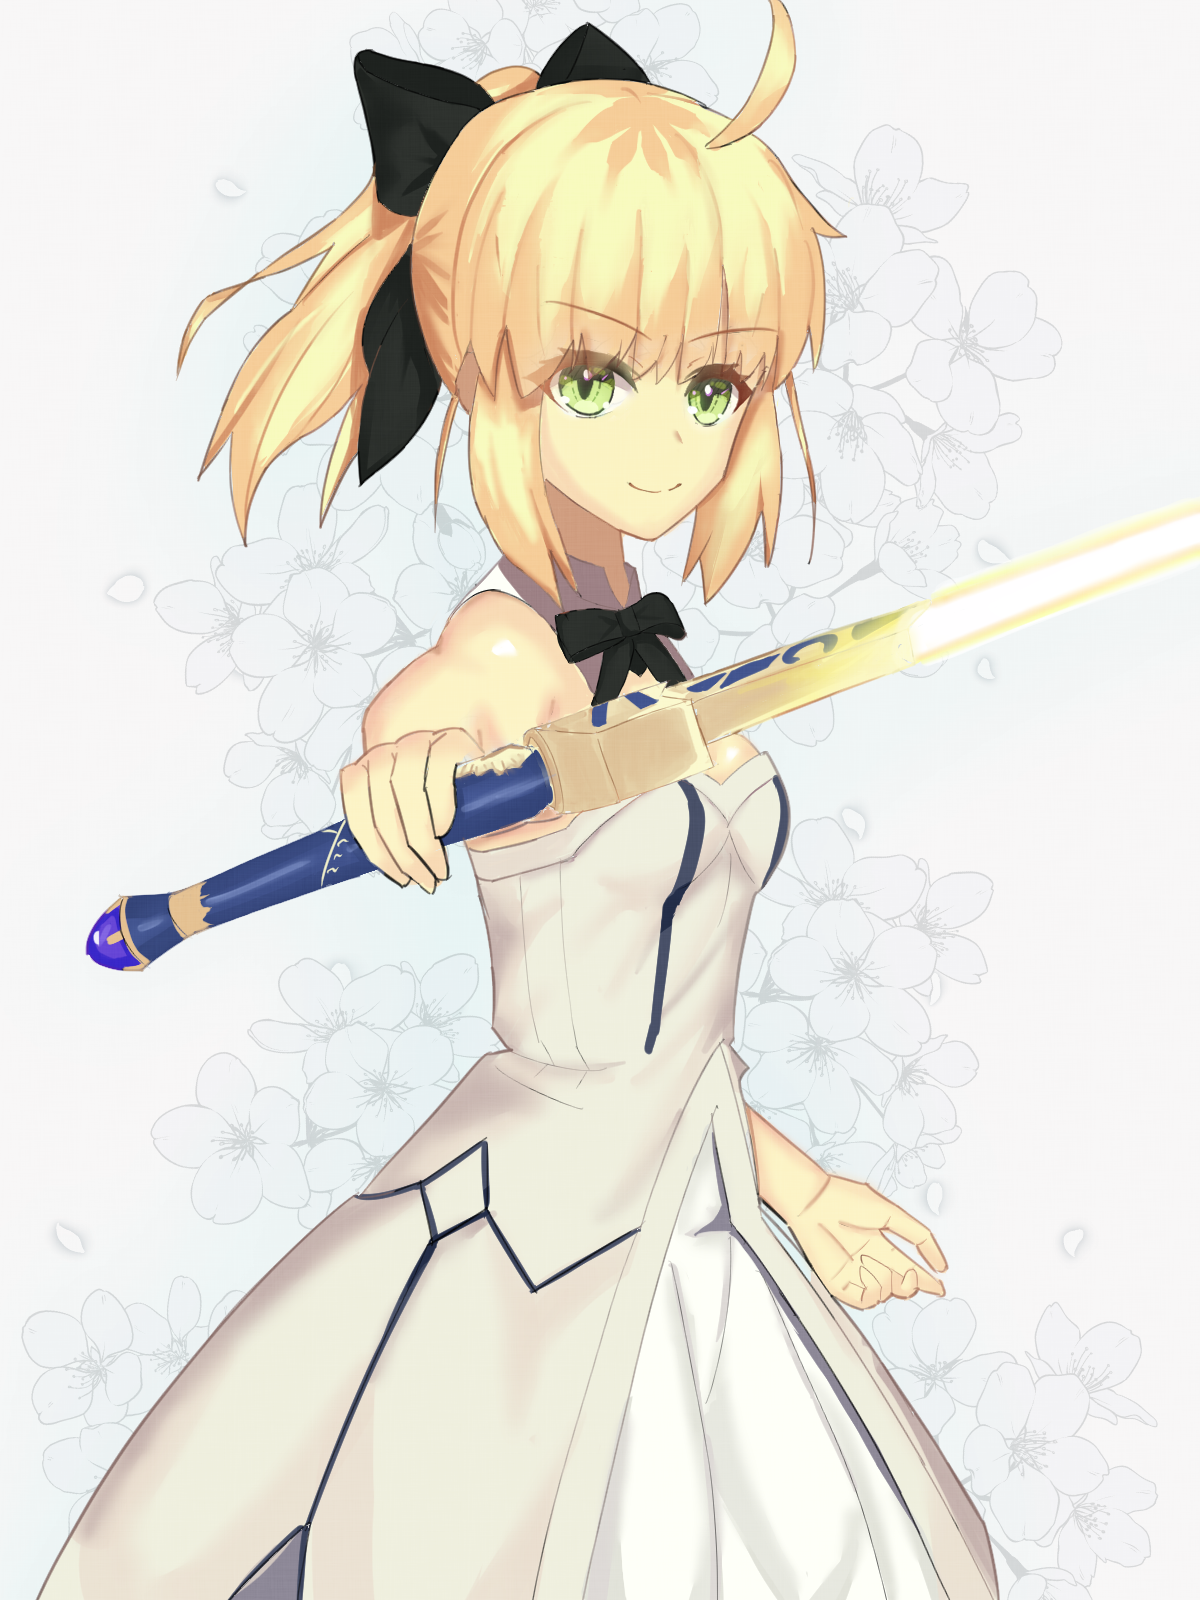 Anime 1200x1600 anime anime girls Fate series Fate/Unlimited Codes  Fate/Grand Order Artoria Pendragon Saber Lily ponytail blonde artwork digital art fan art sword women with swords